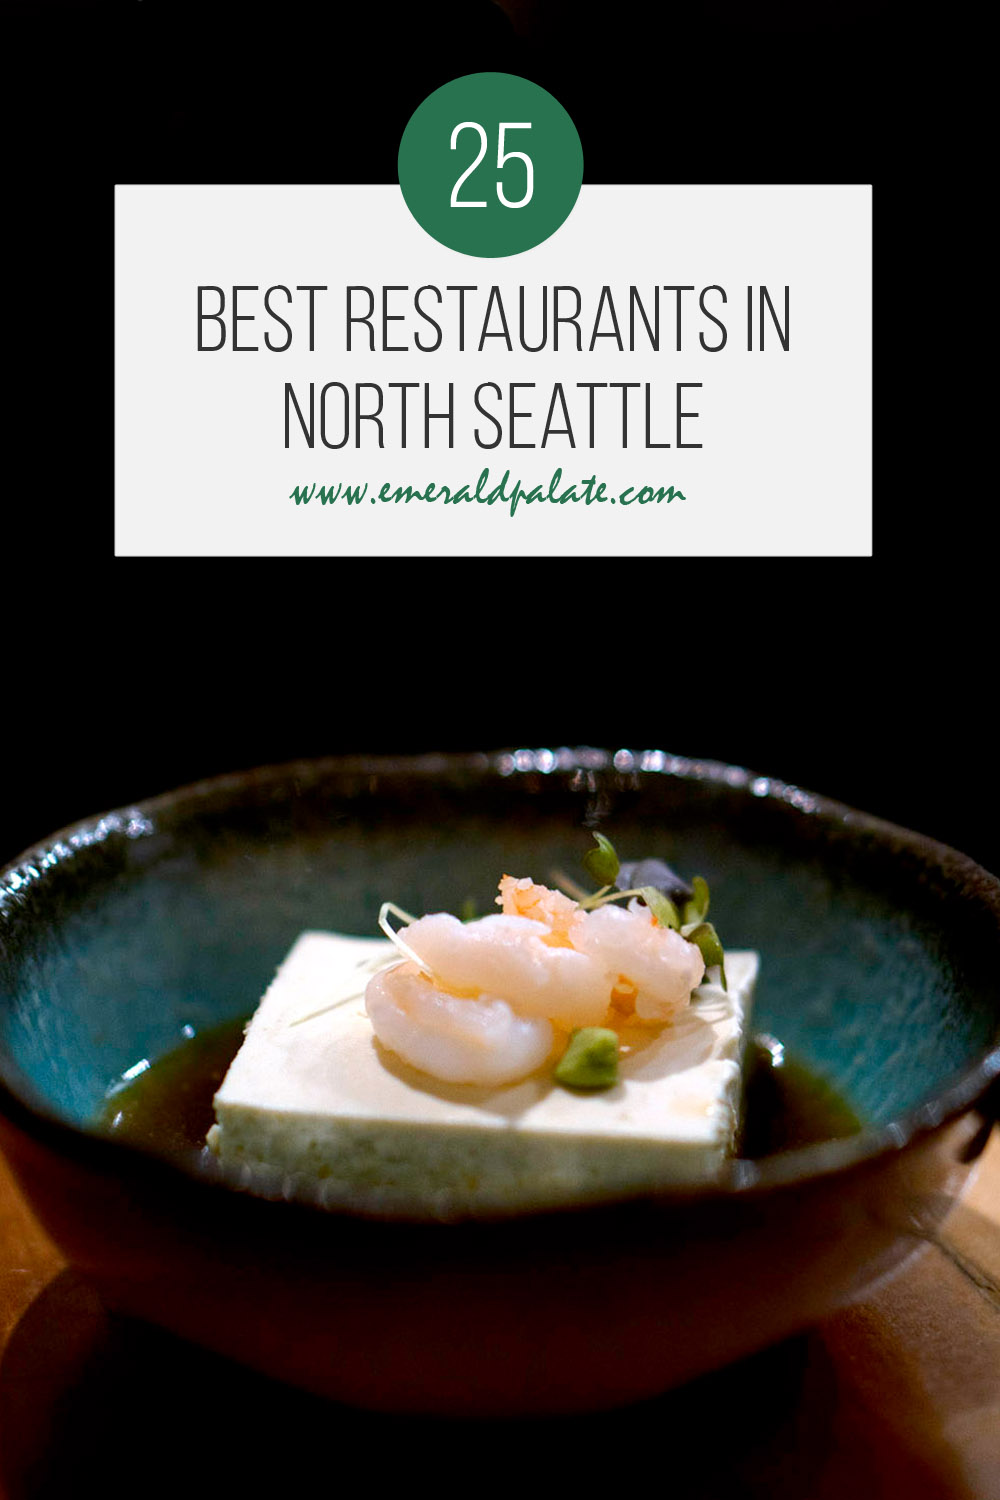 The 25 best restaurants in North Seattle, as told by a local who lives in Ballard.